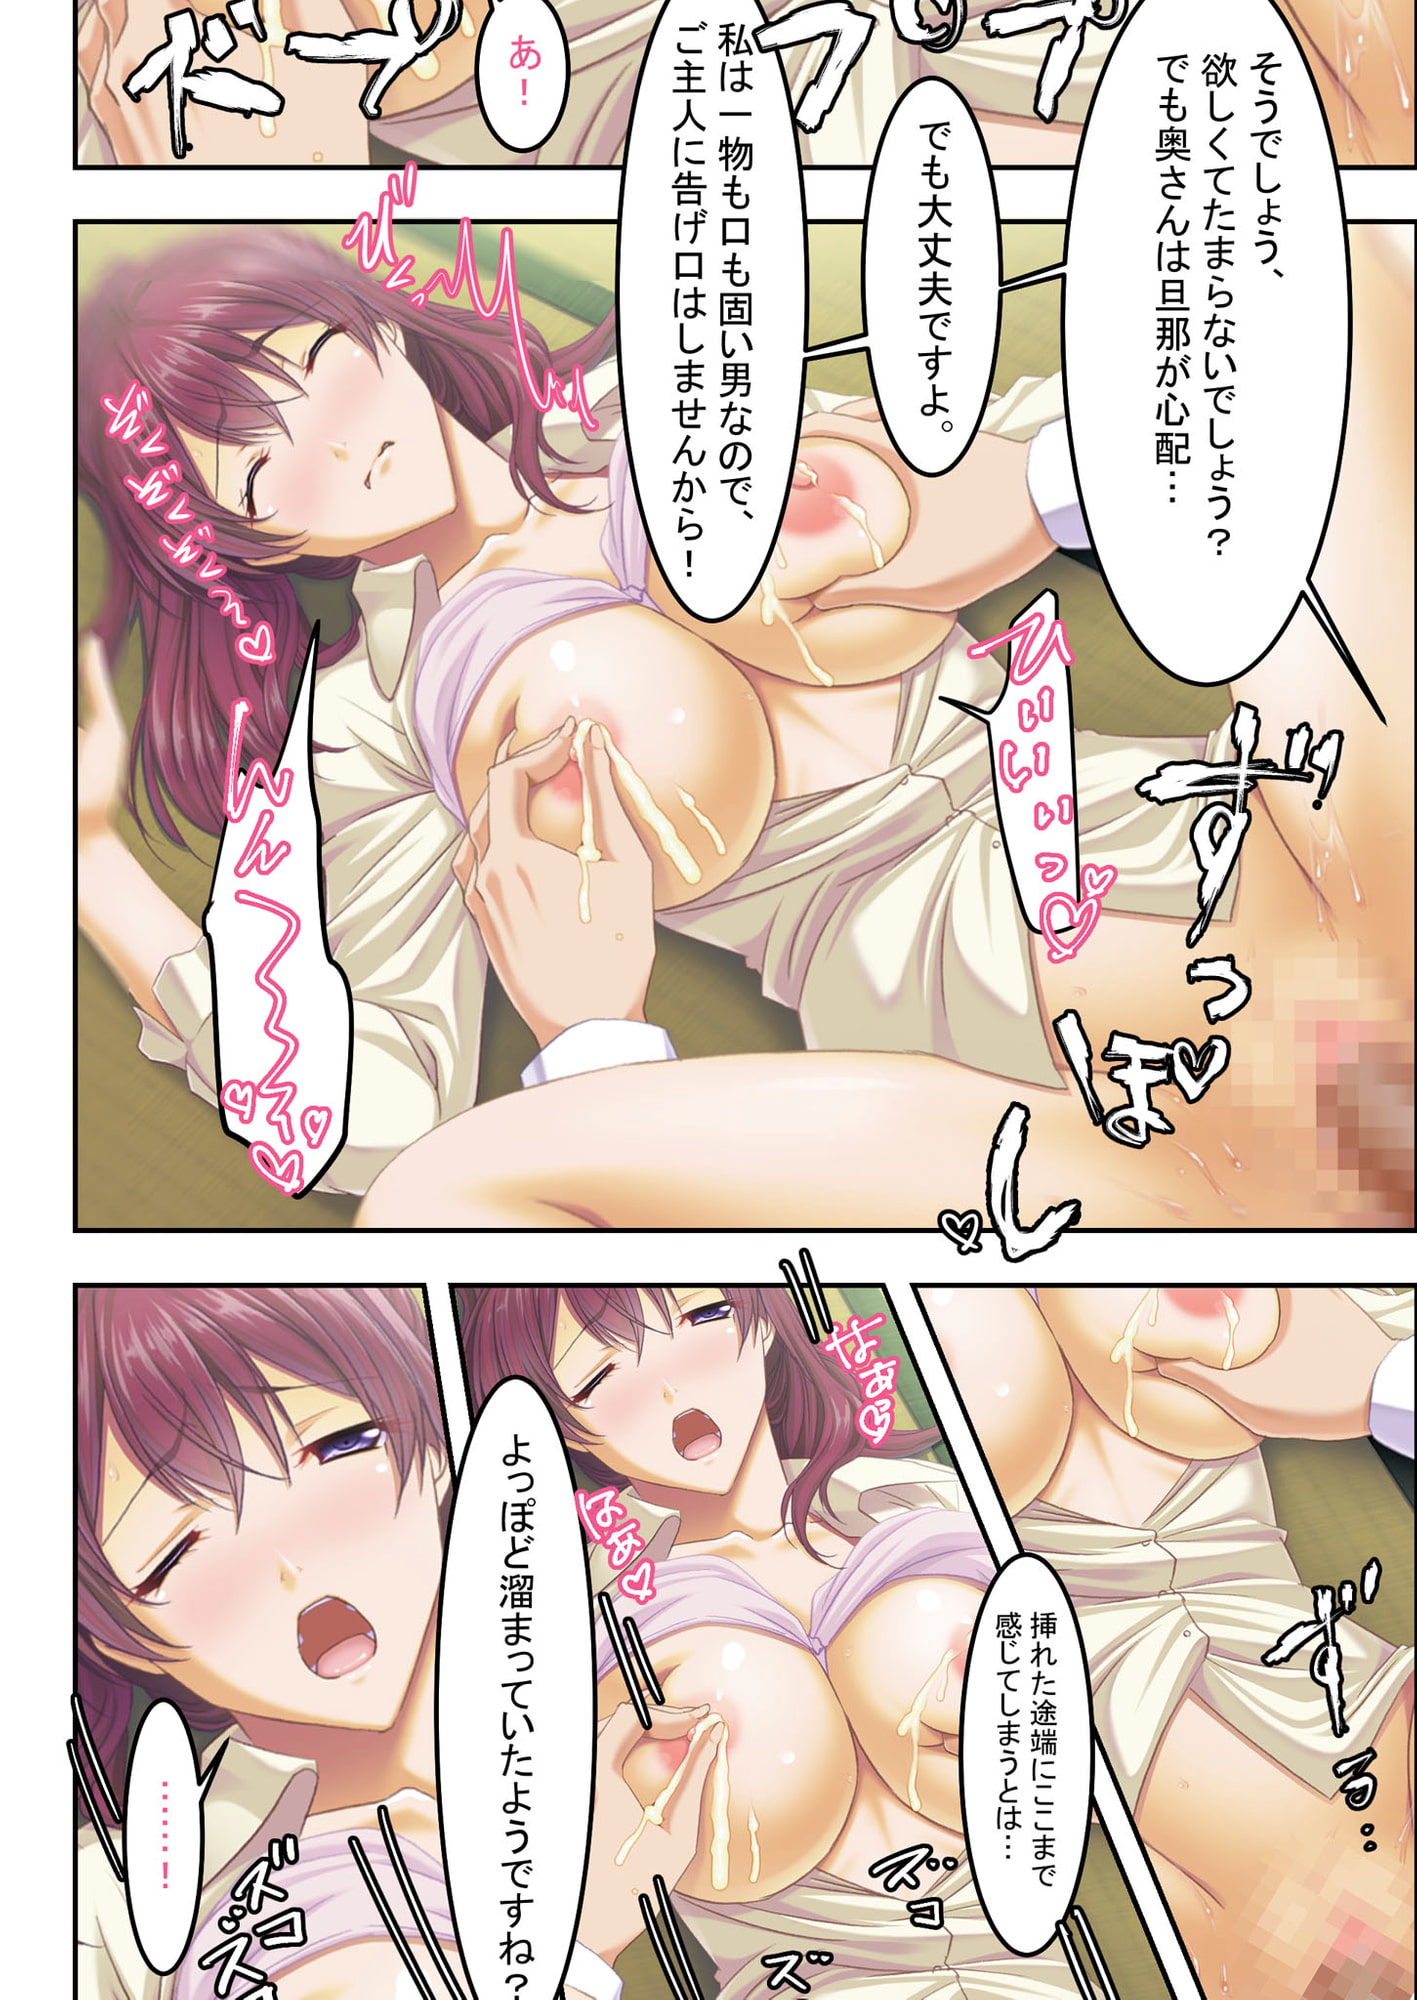 The Lewd Side of the Local Community ~Banged Wives~ [Full Color Comic Ver]